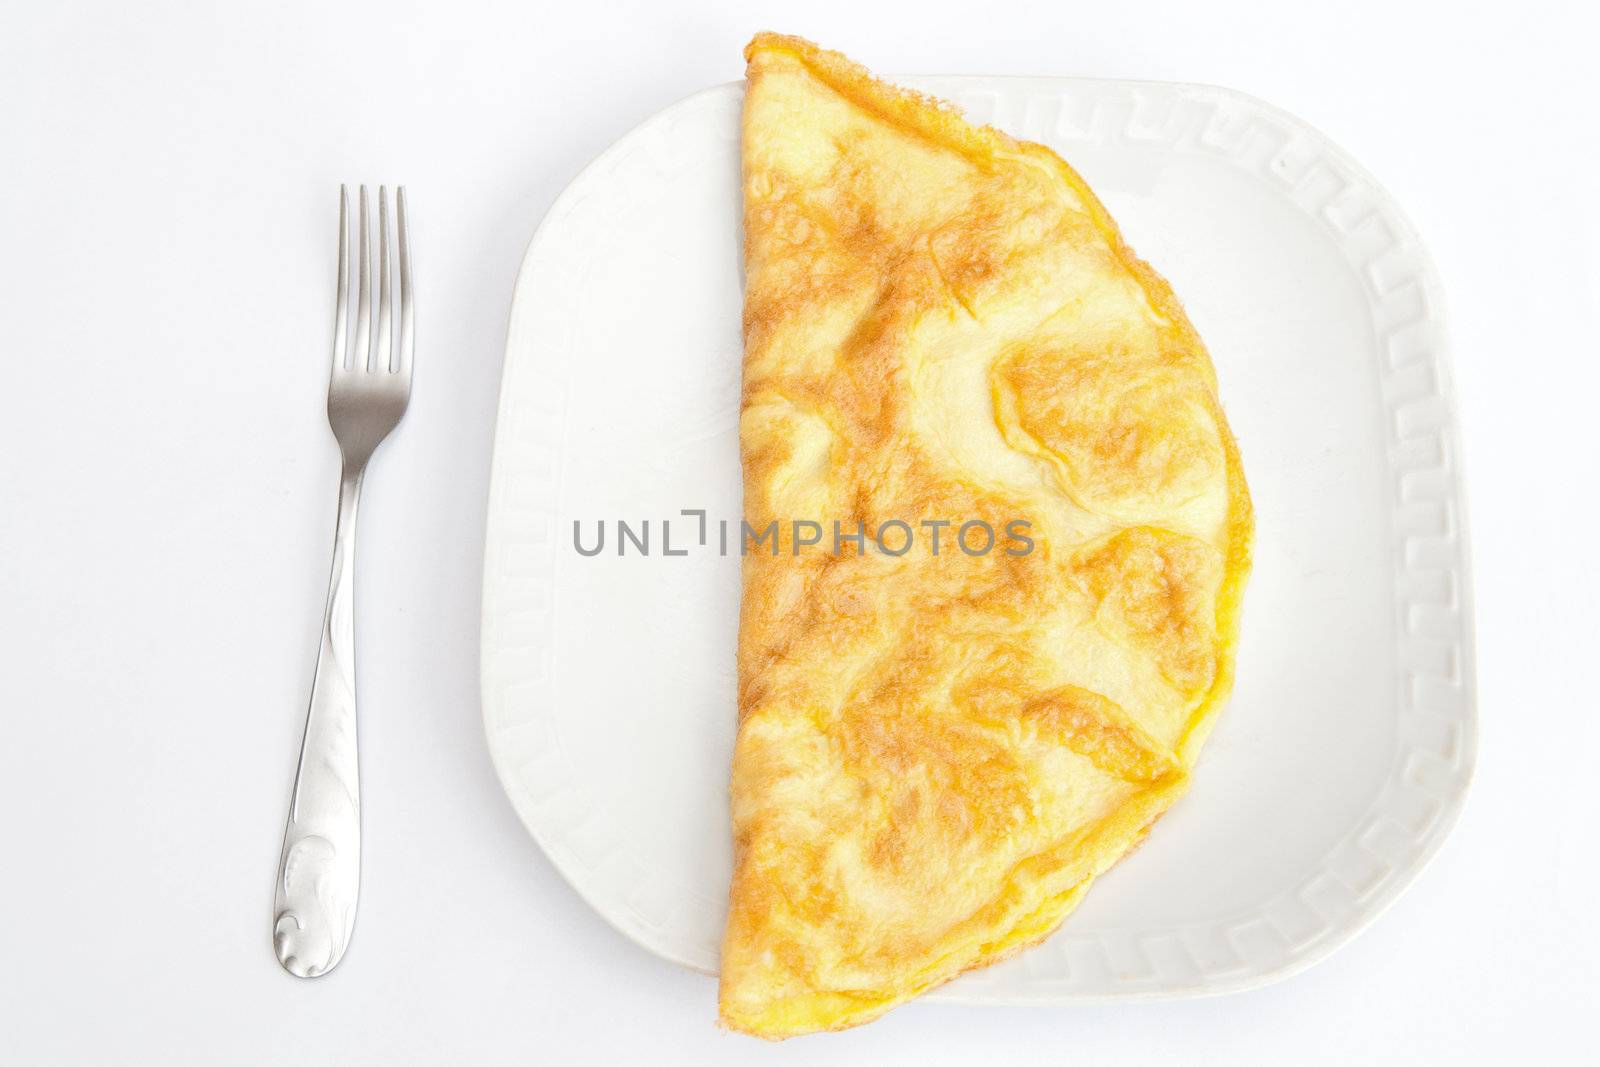 An omelet on the white background